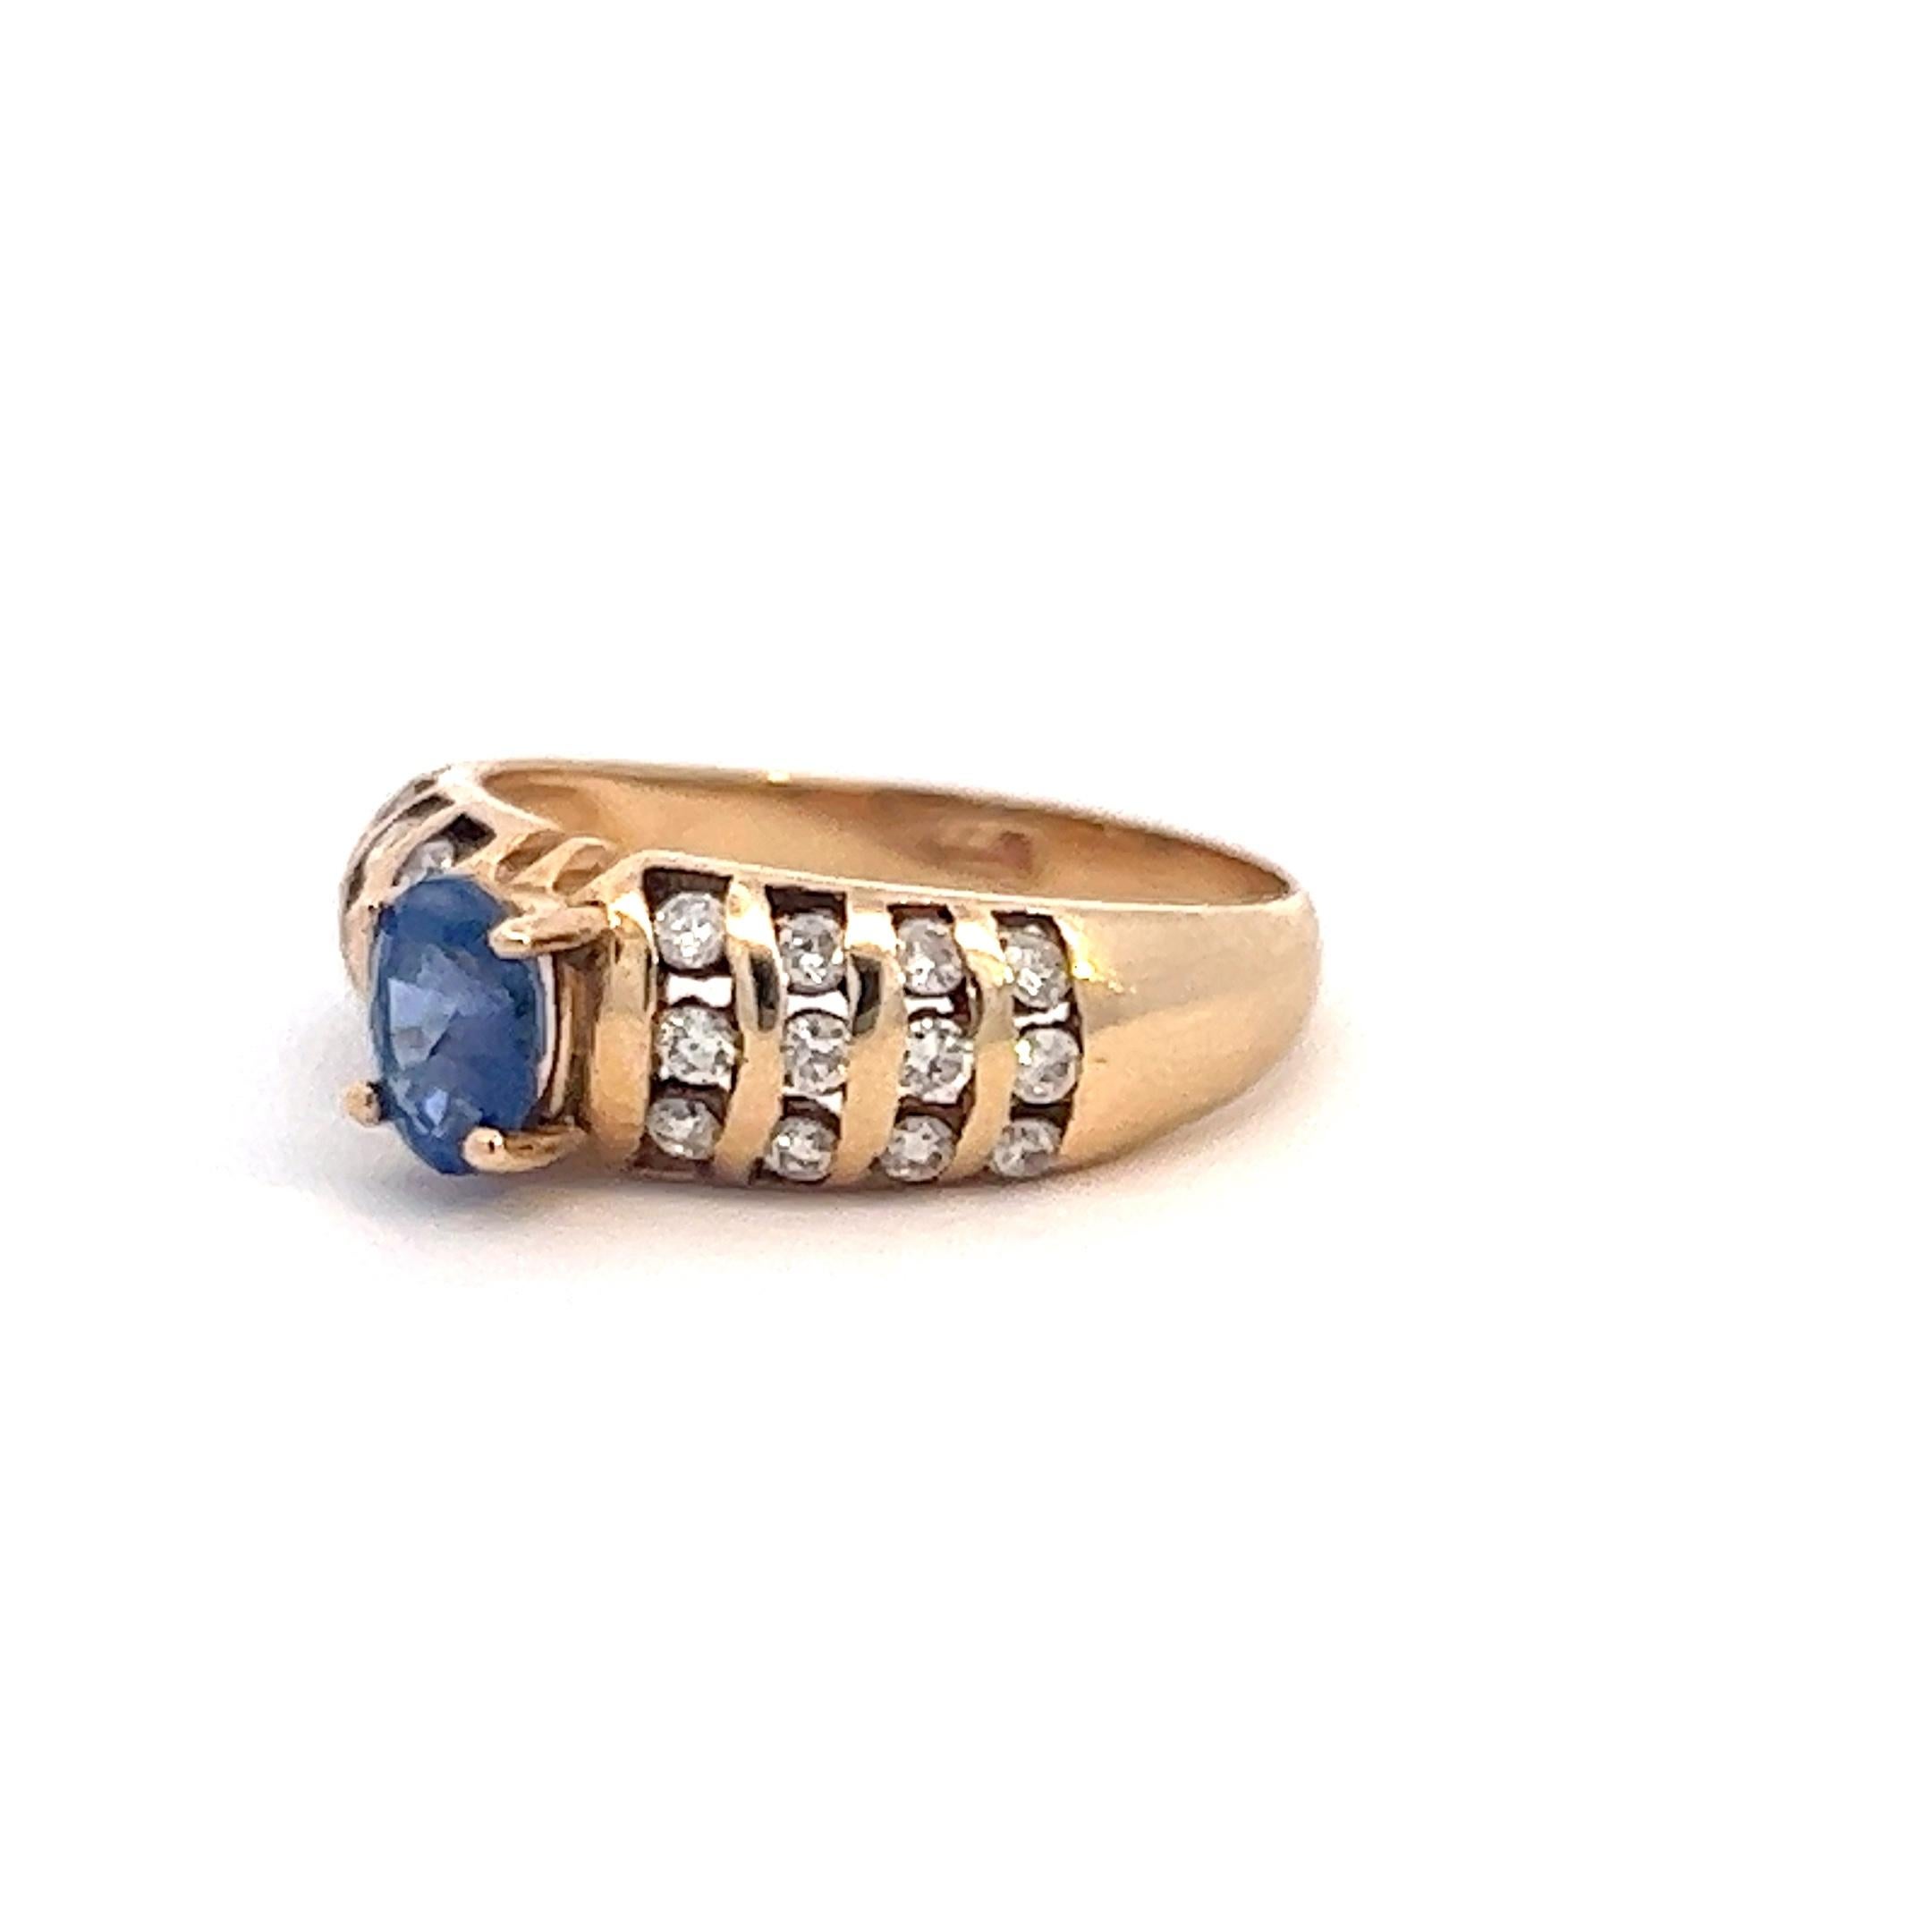 Vintage 14k Sapphire Diamond Ring In Good Condition For Sale In Austin, TX